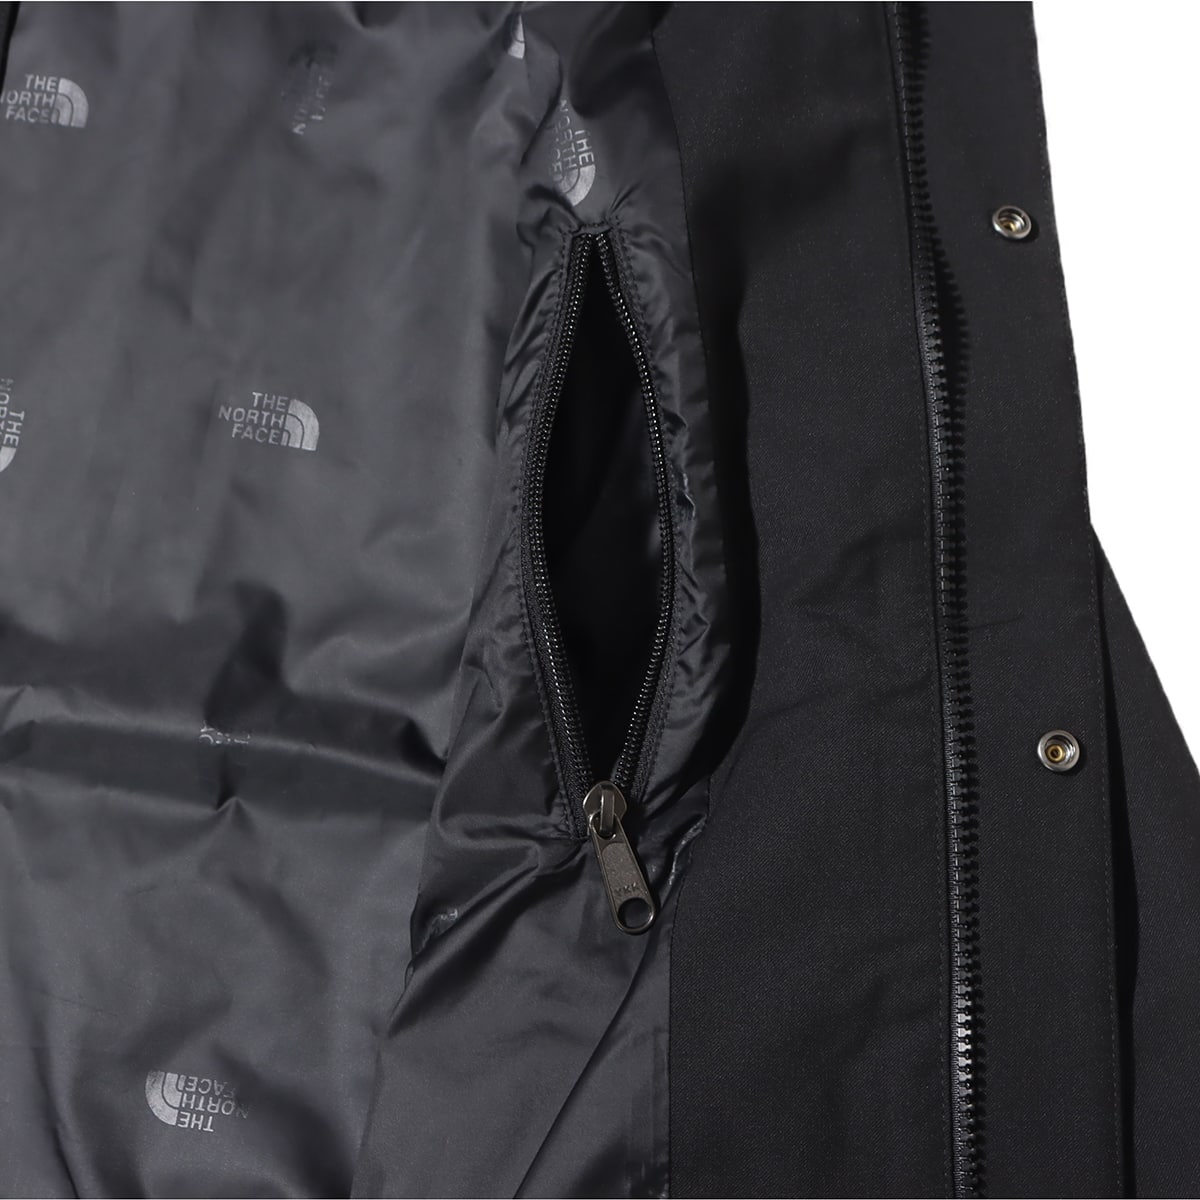 THE NORTH FACE WOOLY HYDRENA JACKET BLACK 23FW-I